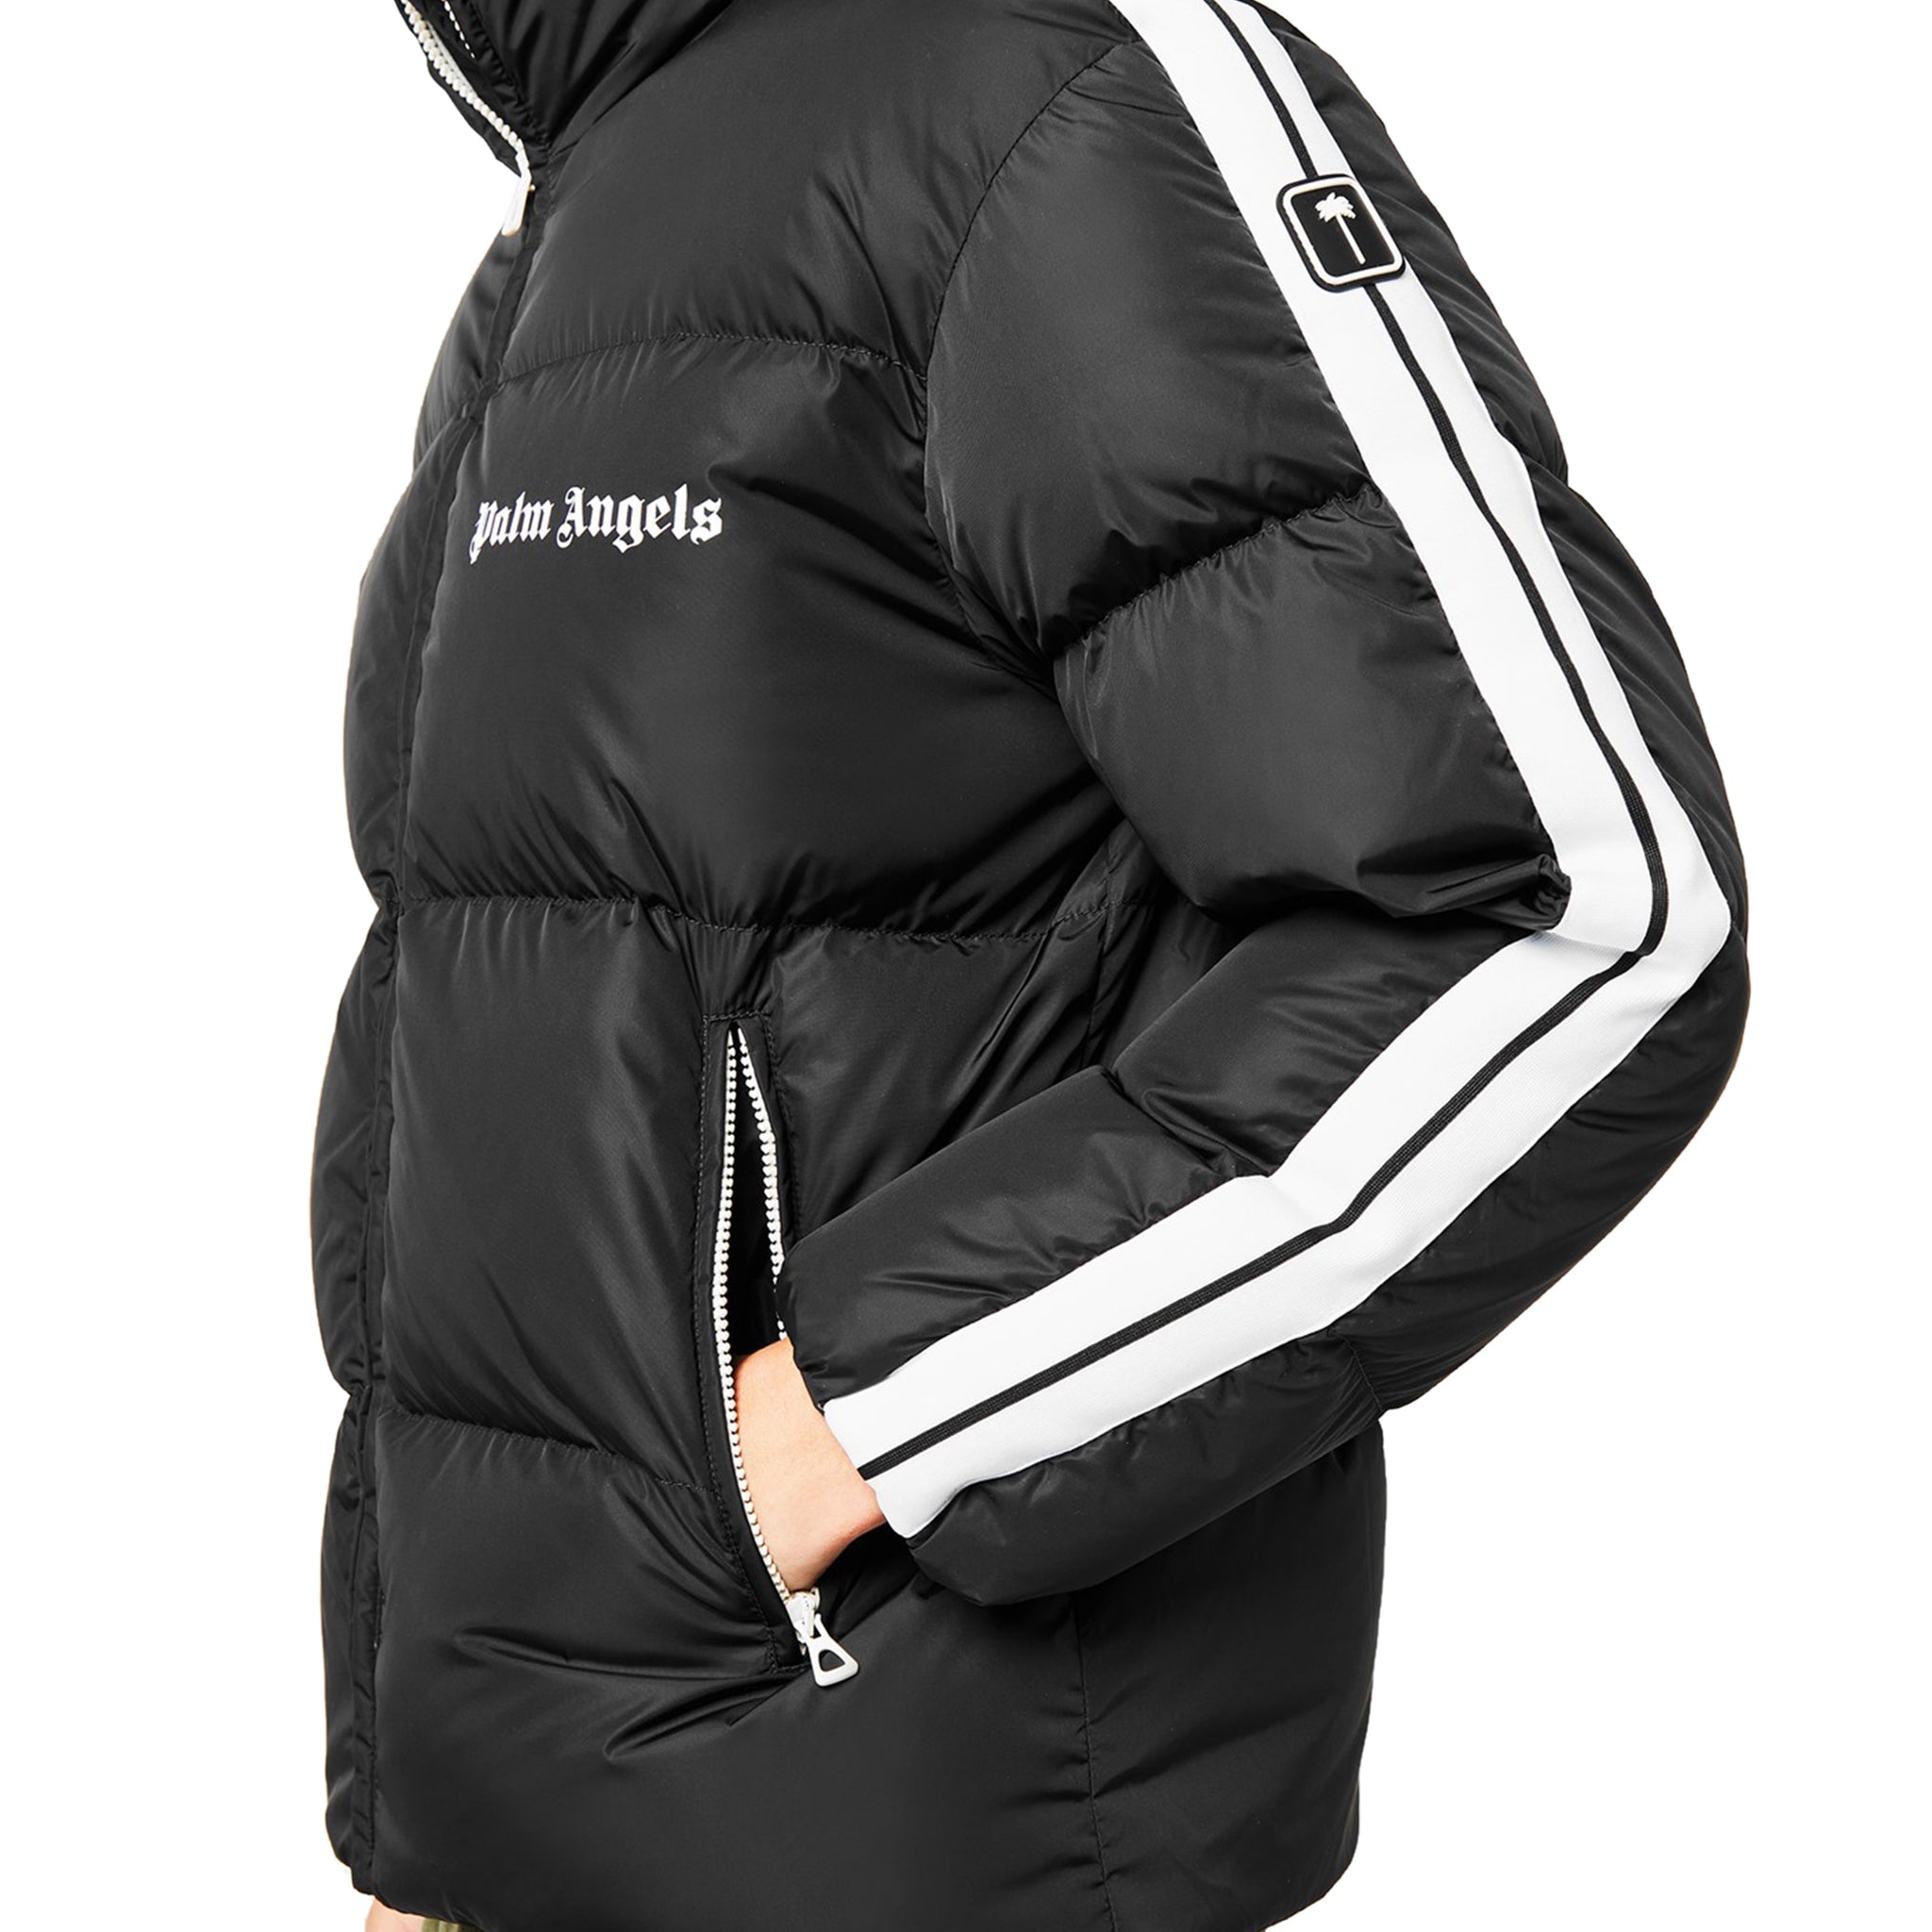 Image of Palm Angels Black Puffer Track Padded Jacket